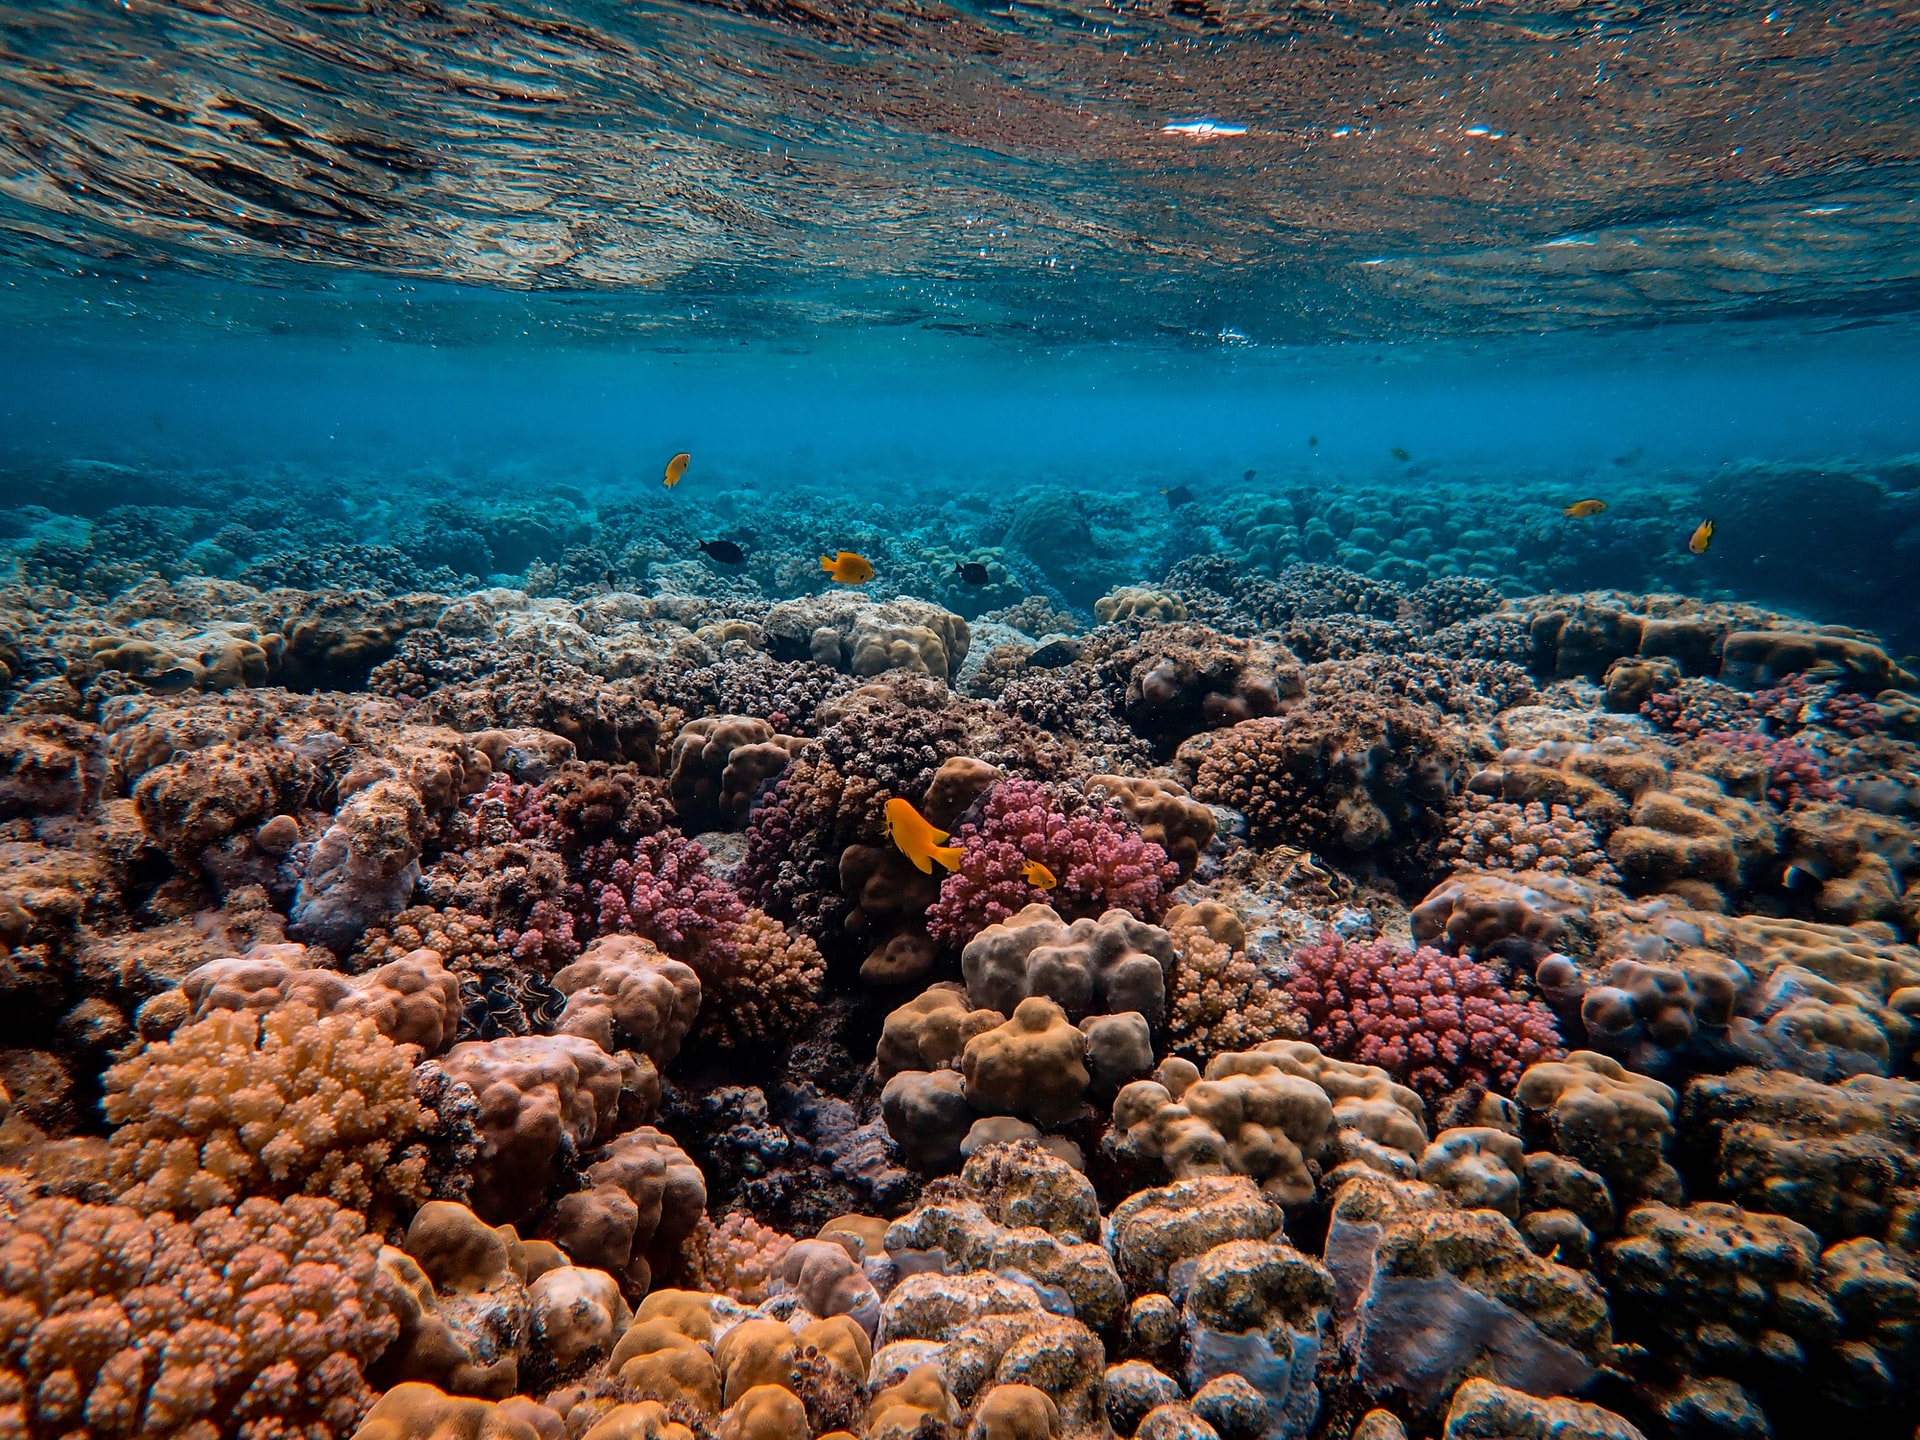 Coral reef as shown from under the water